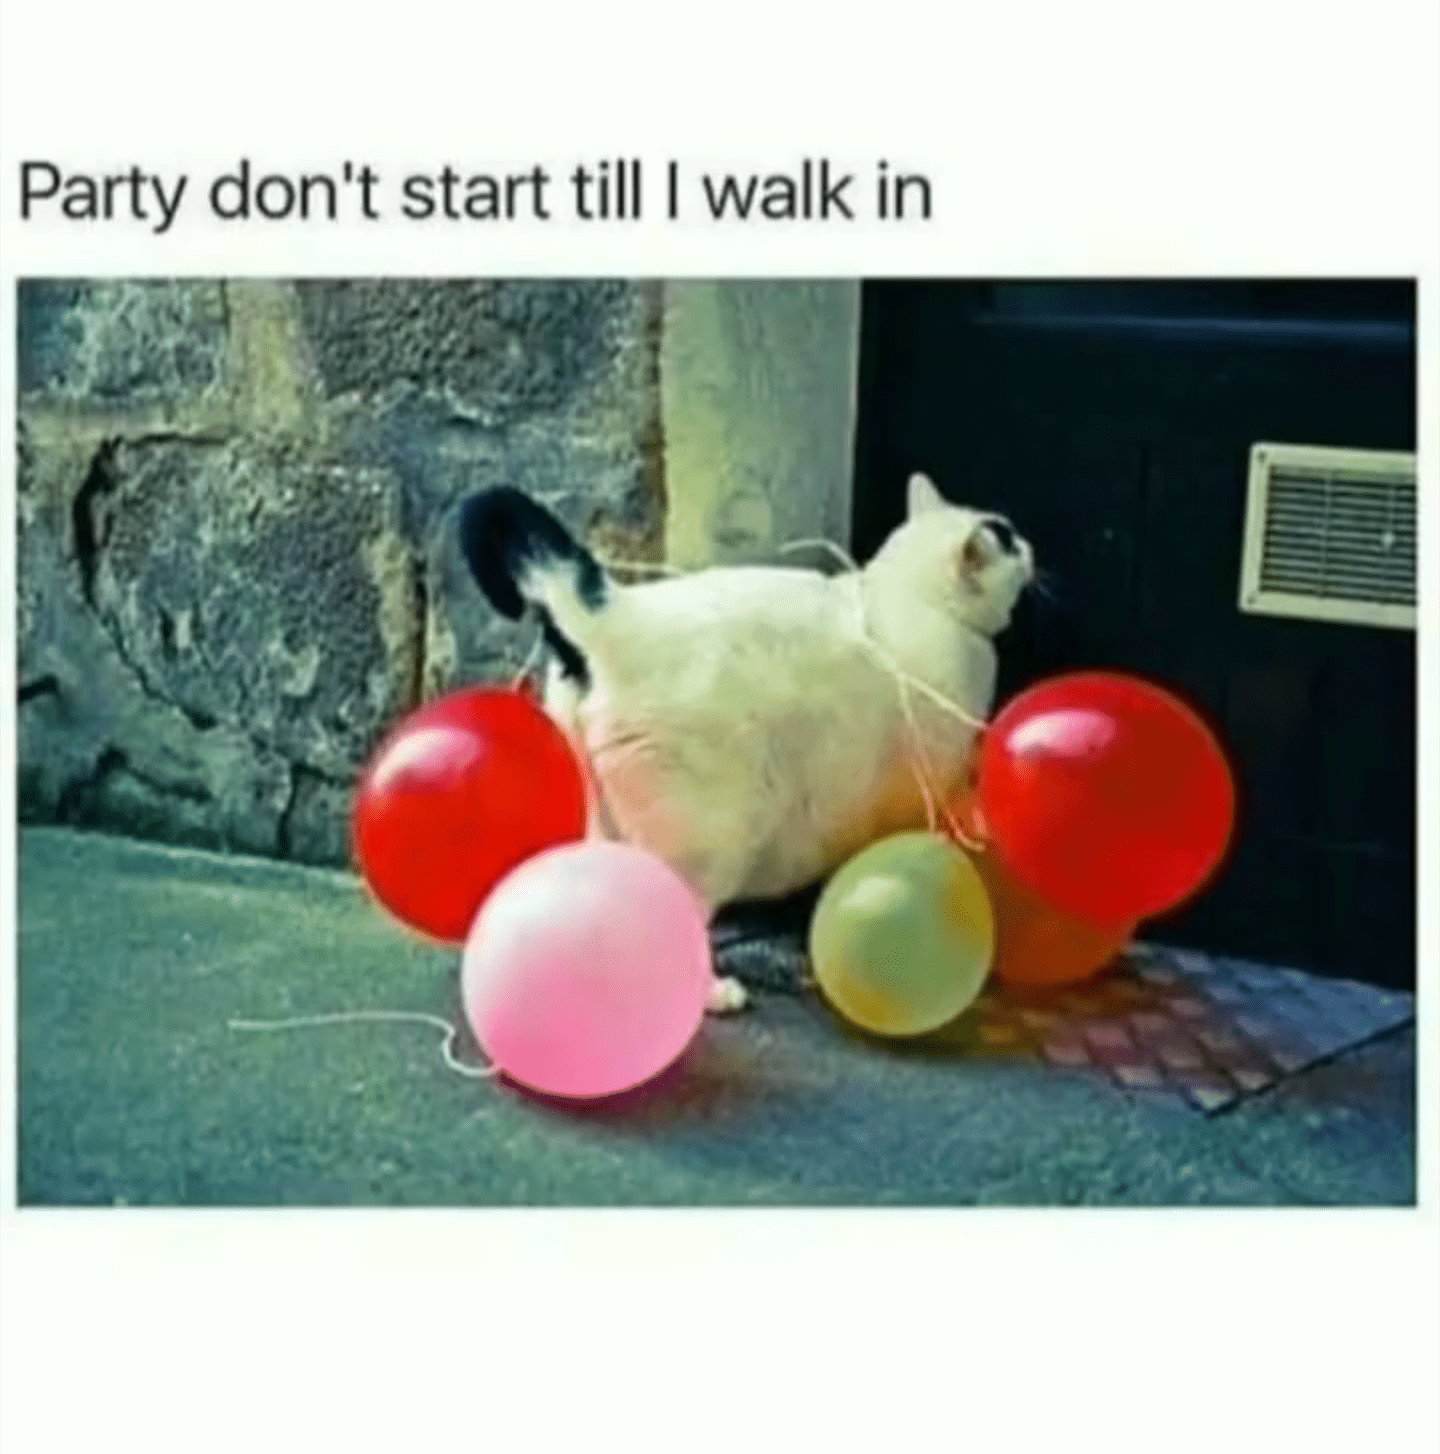 party don't stop